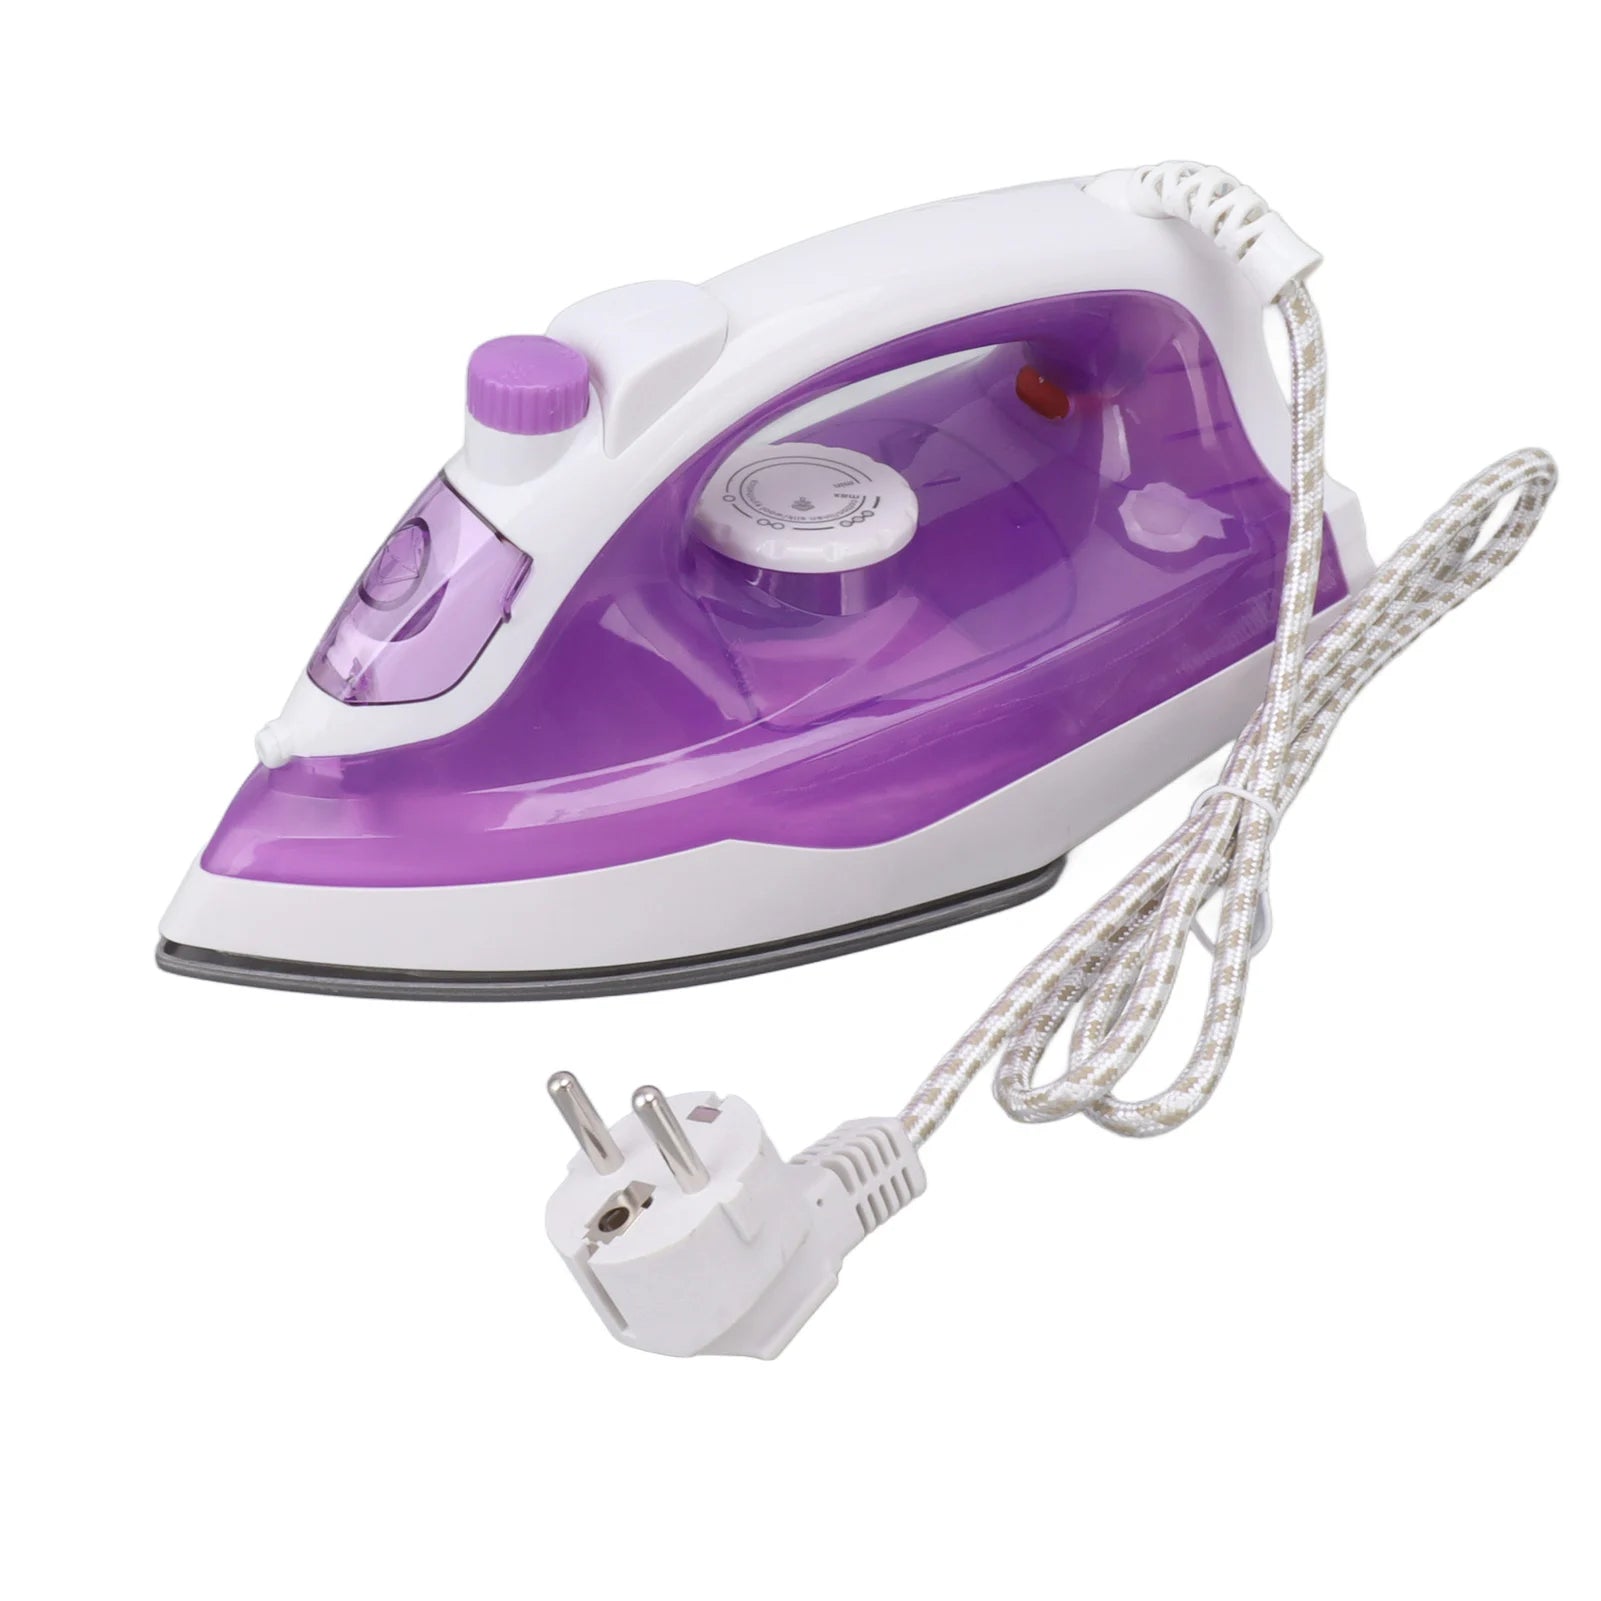 1200W Portable Steam Iron Handheld Clothes Iron for Home 170ml Water Tank Handheld Wet Dry Electric Iron 220V EU Plug